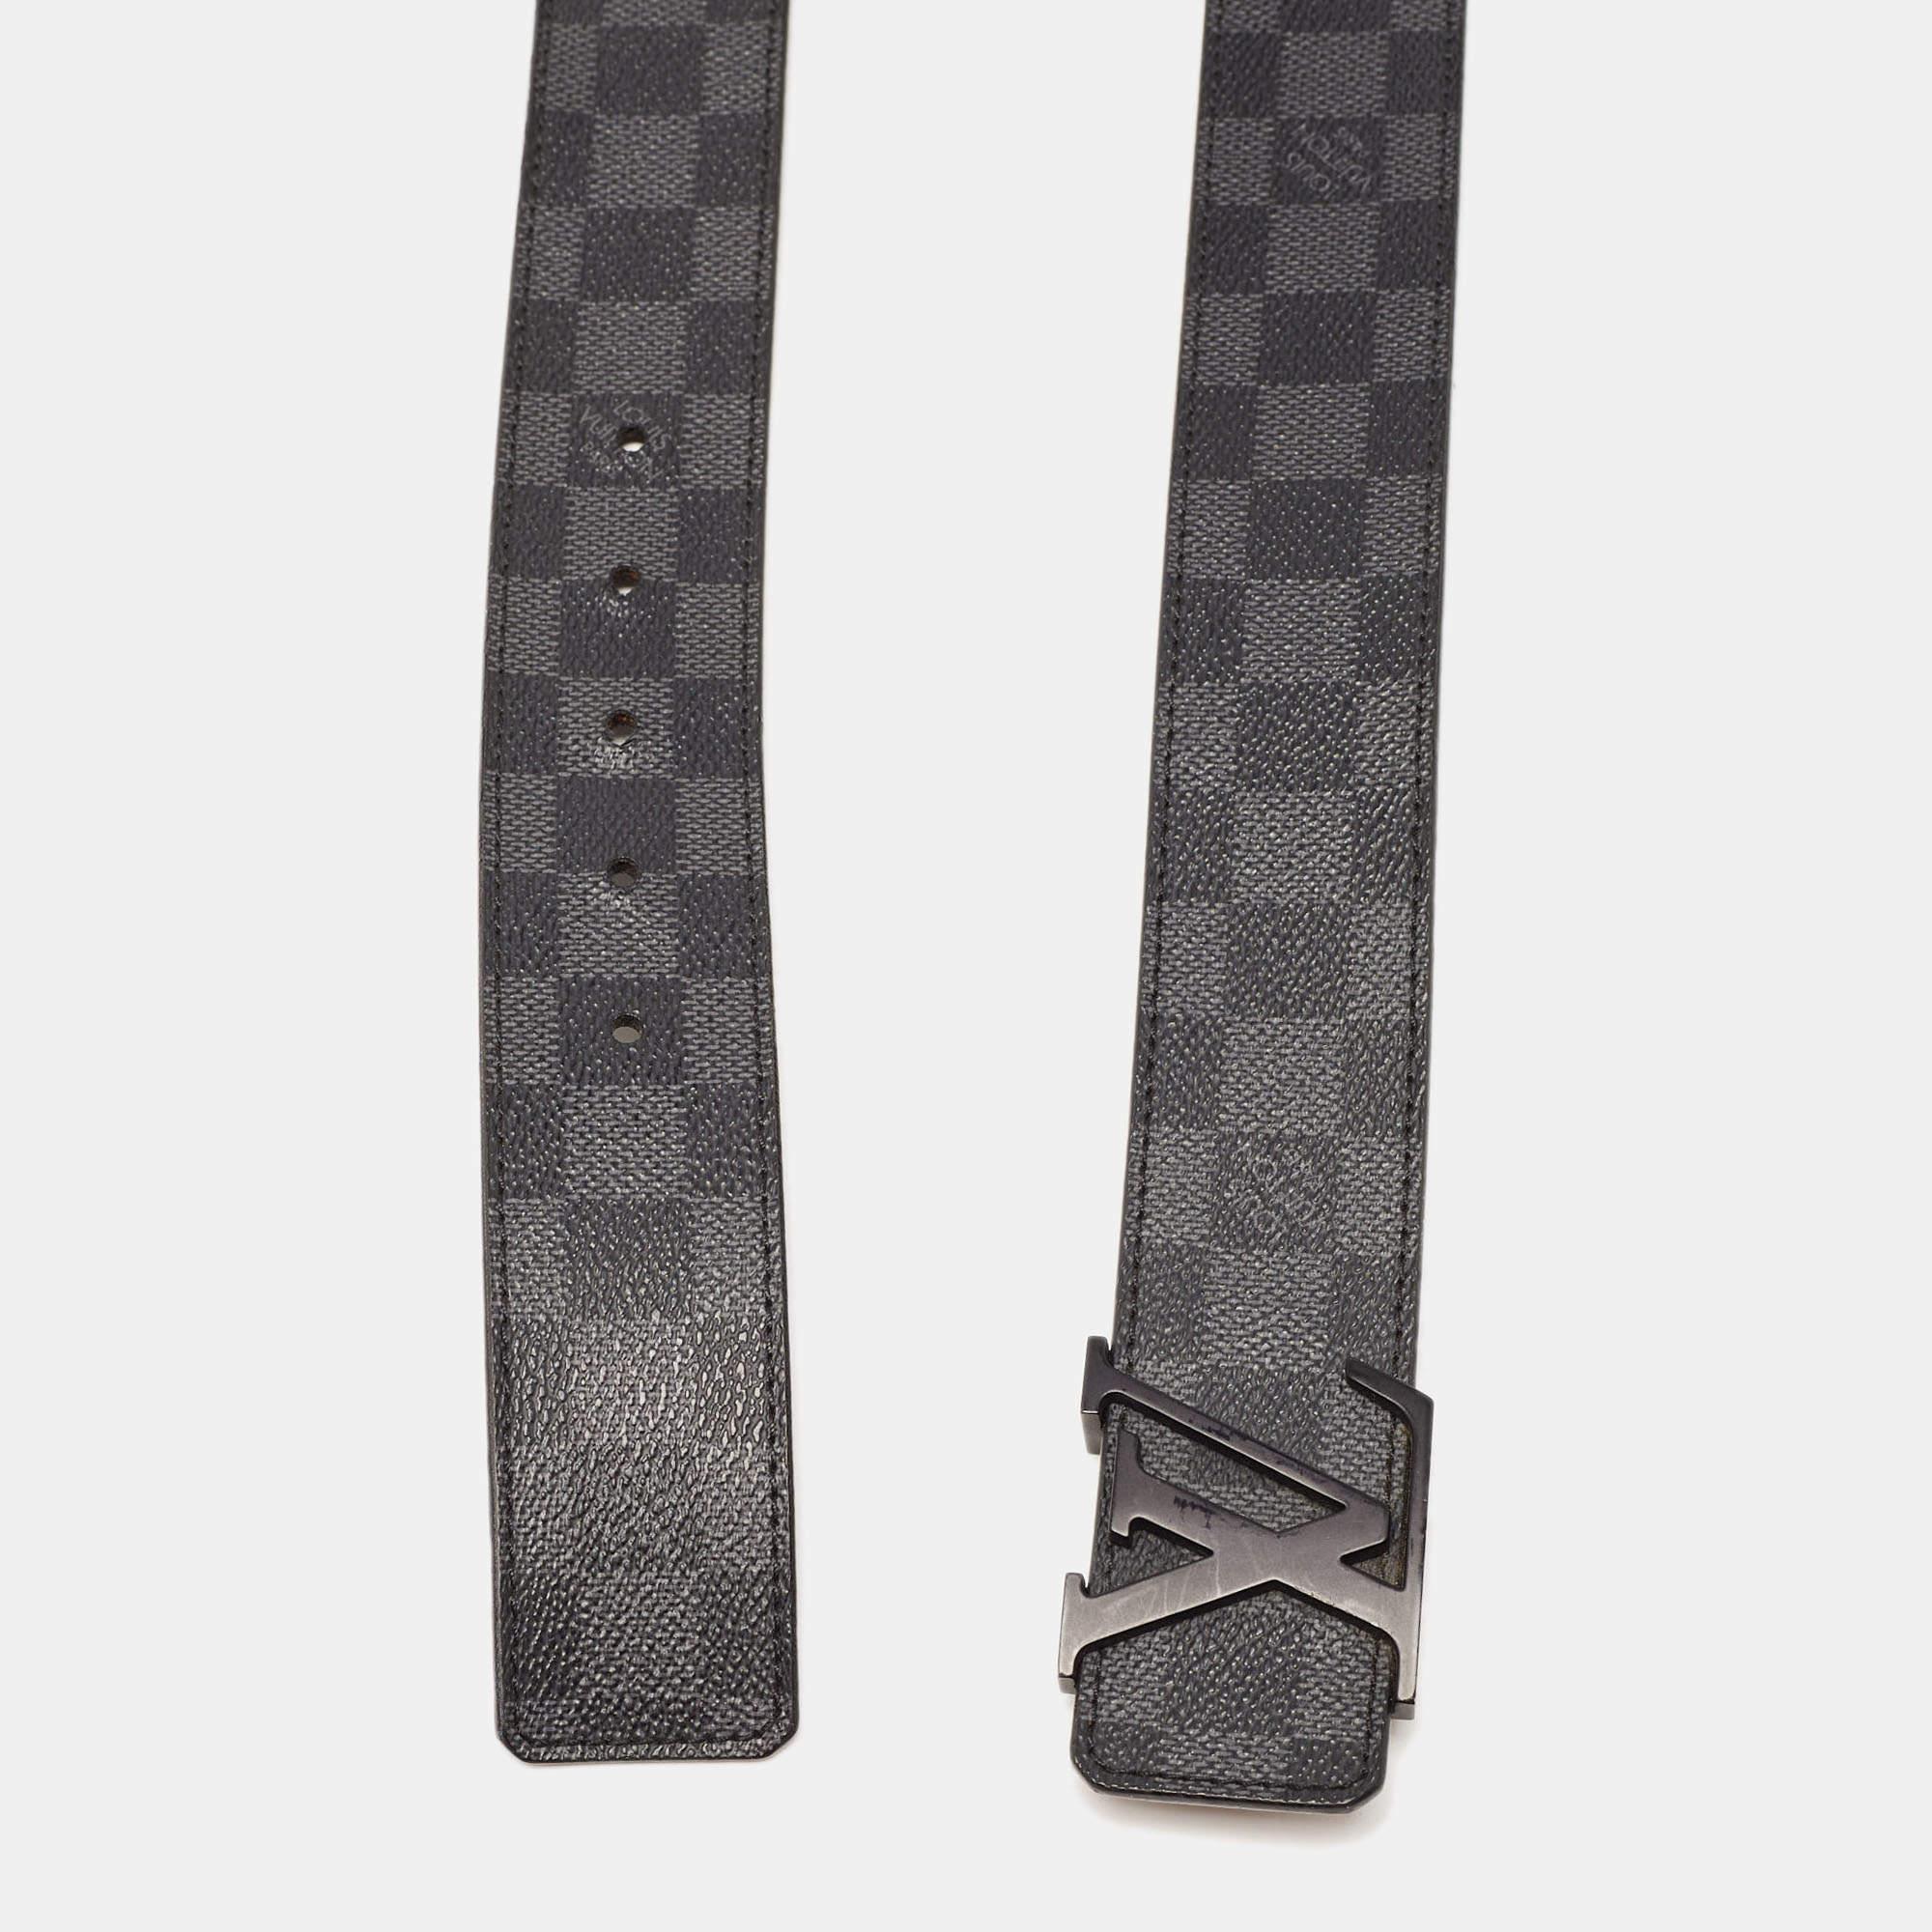 Looking to accent your casual look? Then this Louis Vuitton belt is the accessory you have been waiting for! It is crafted from Damier Graphite coated canvas and is accented with a black-tone LV buckle.

